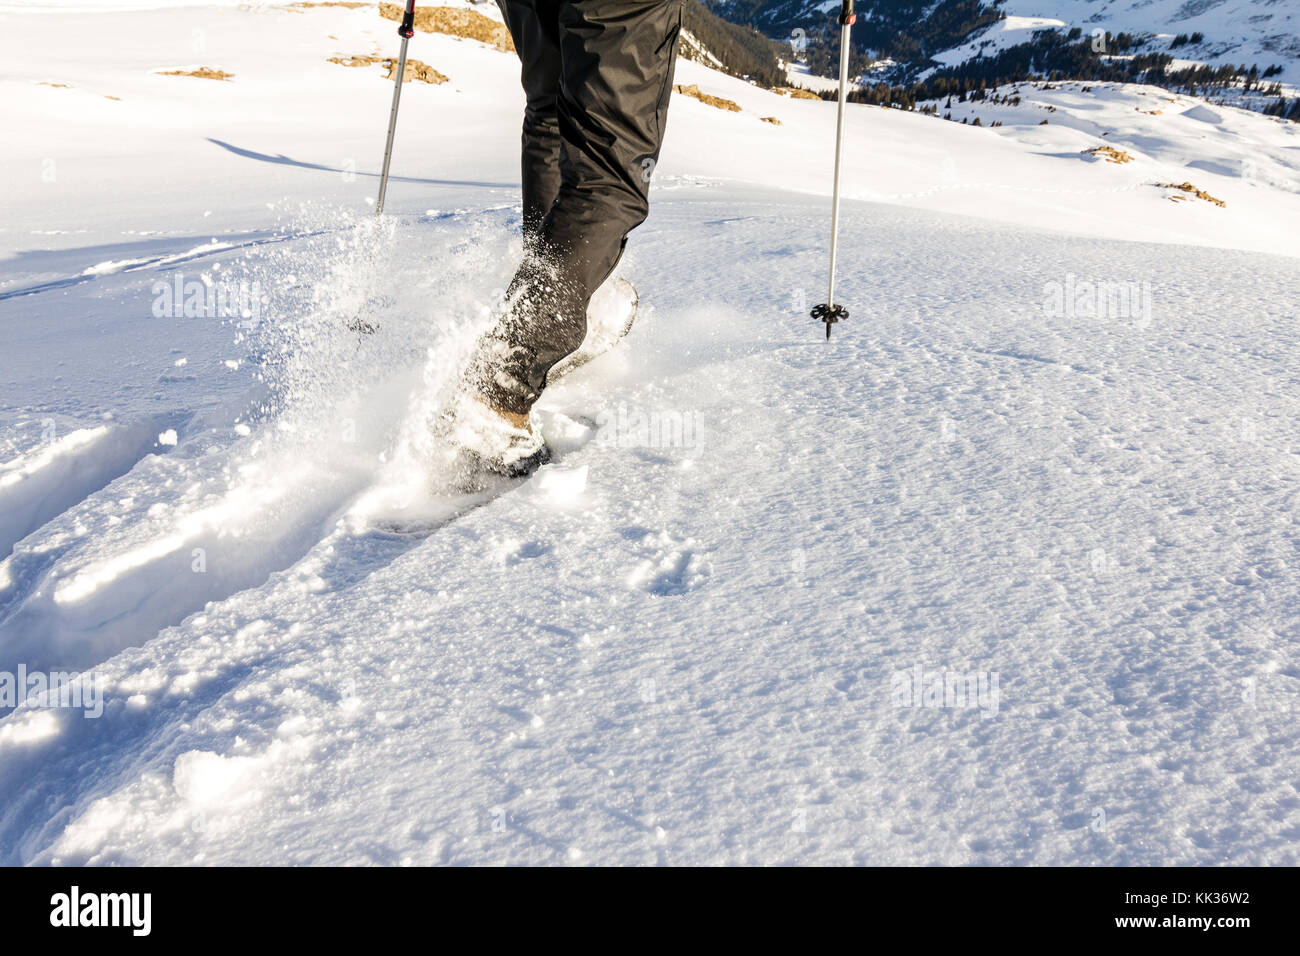 Man running downhill through deep snow with snoeshoes and hiking sticks. Stock Photo